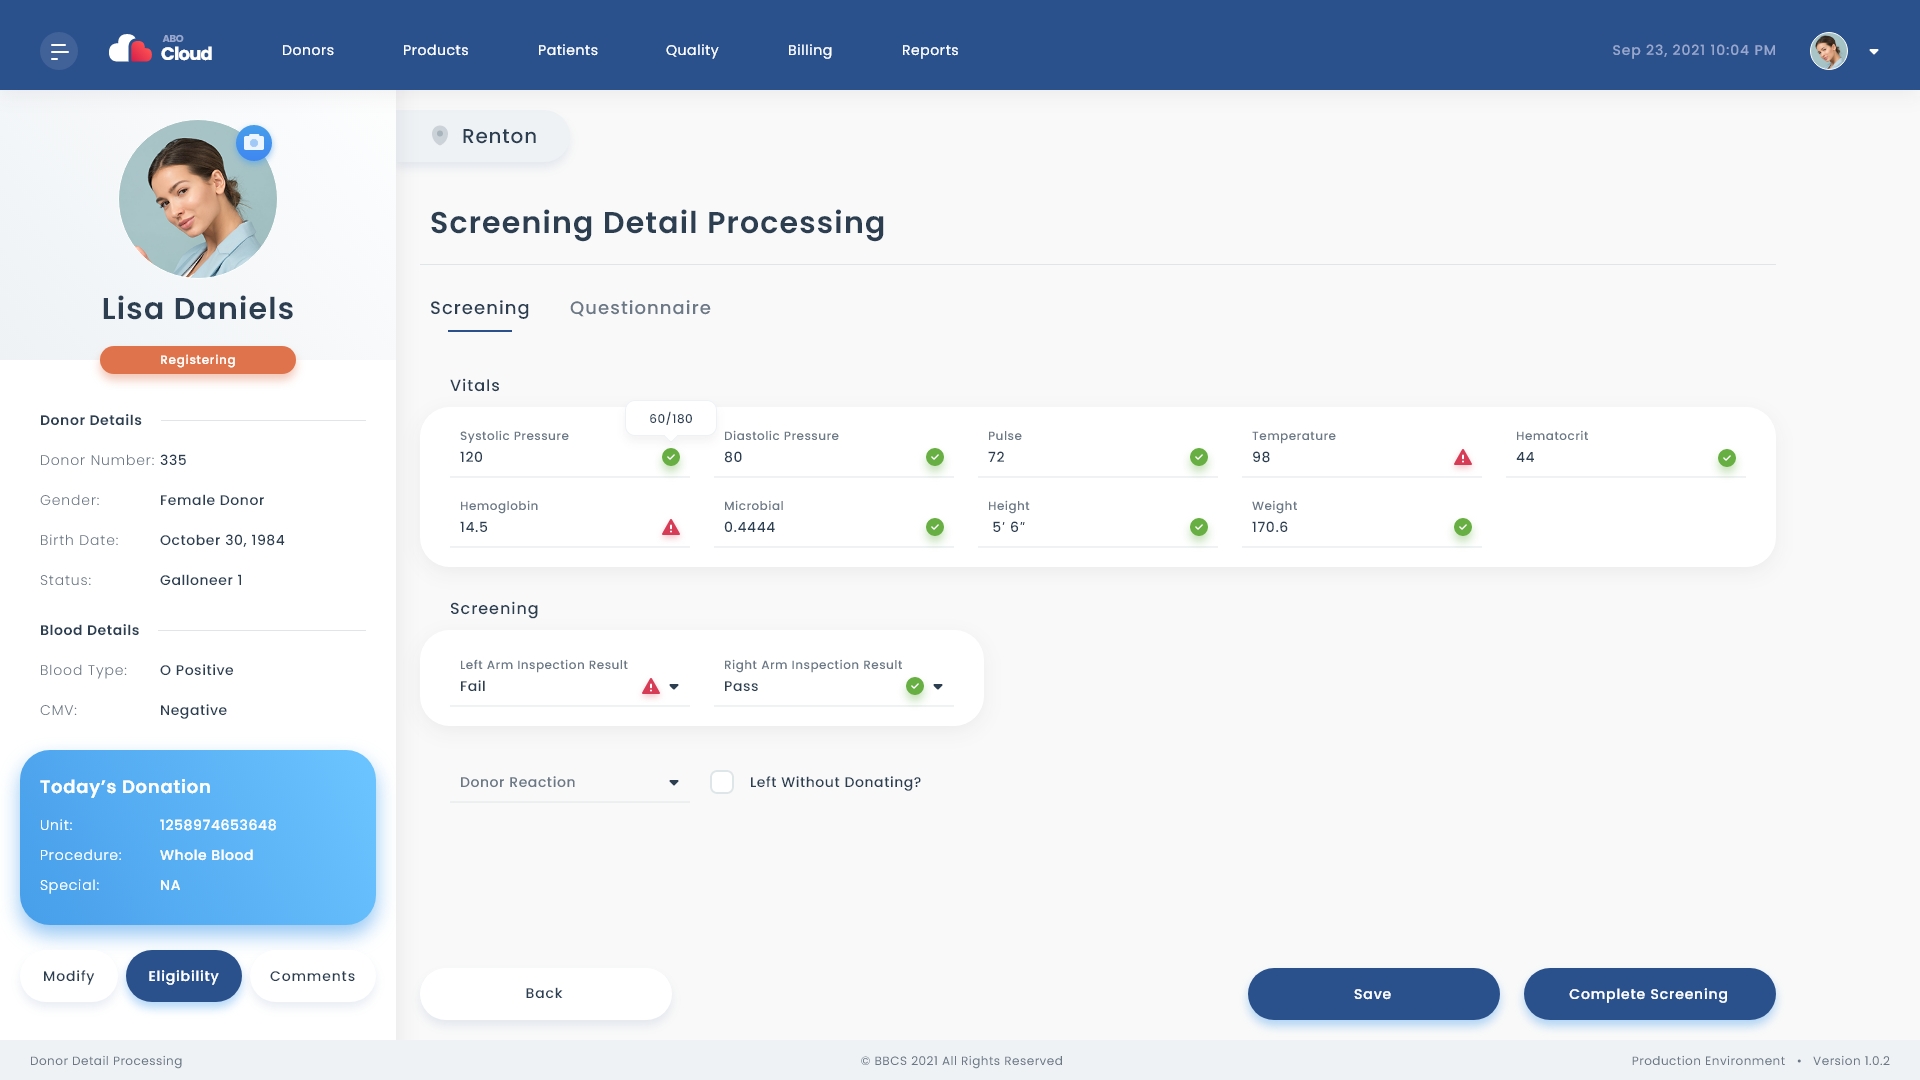 Screening detail processing screen. Displays general donor information on the left pane, and screening details that need to be captured the the physical portion of donor screening.